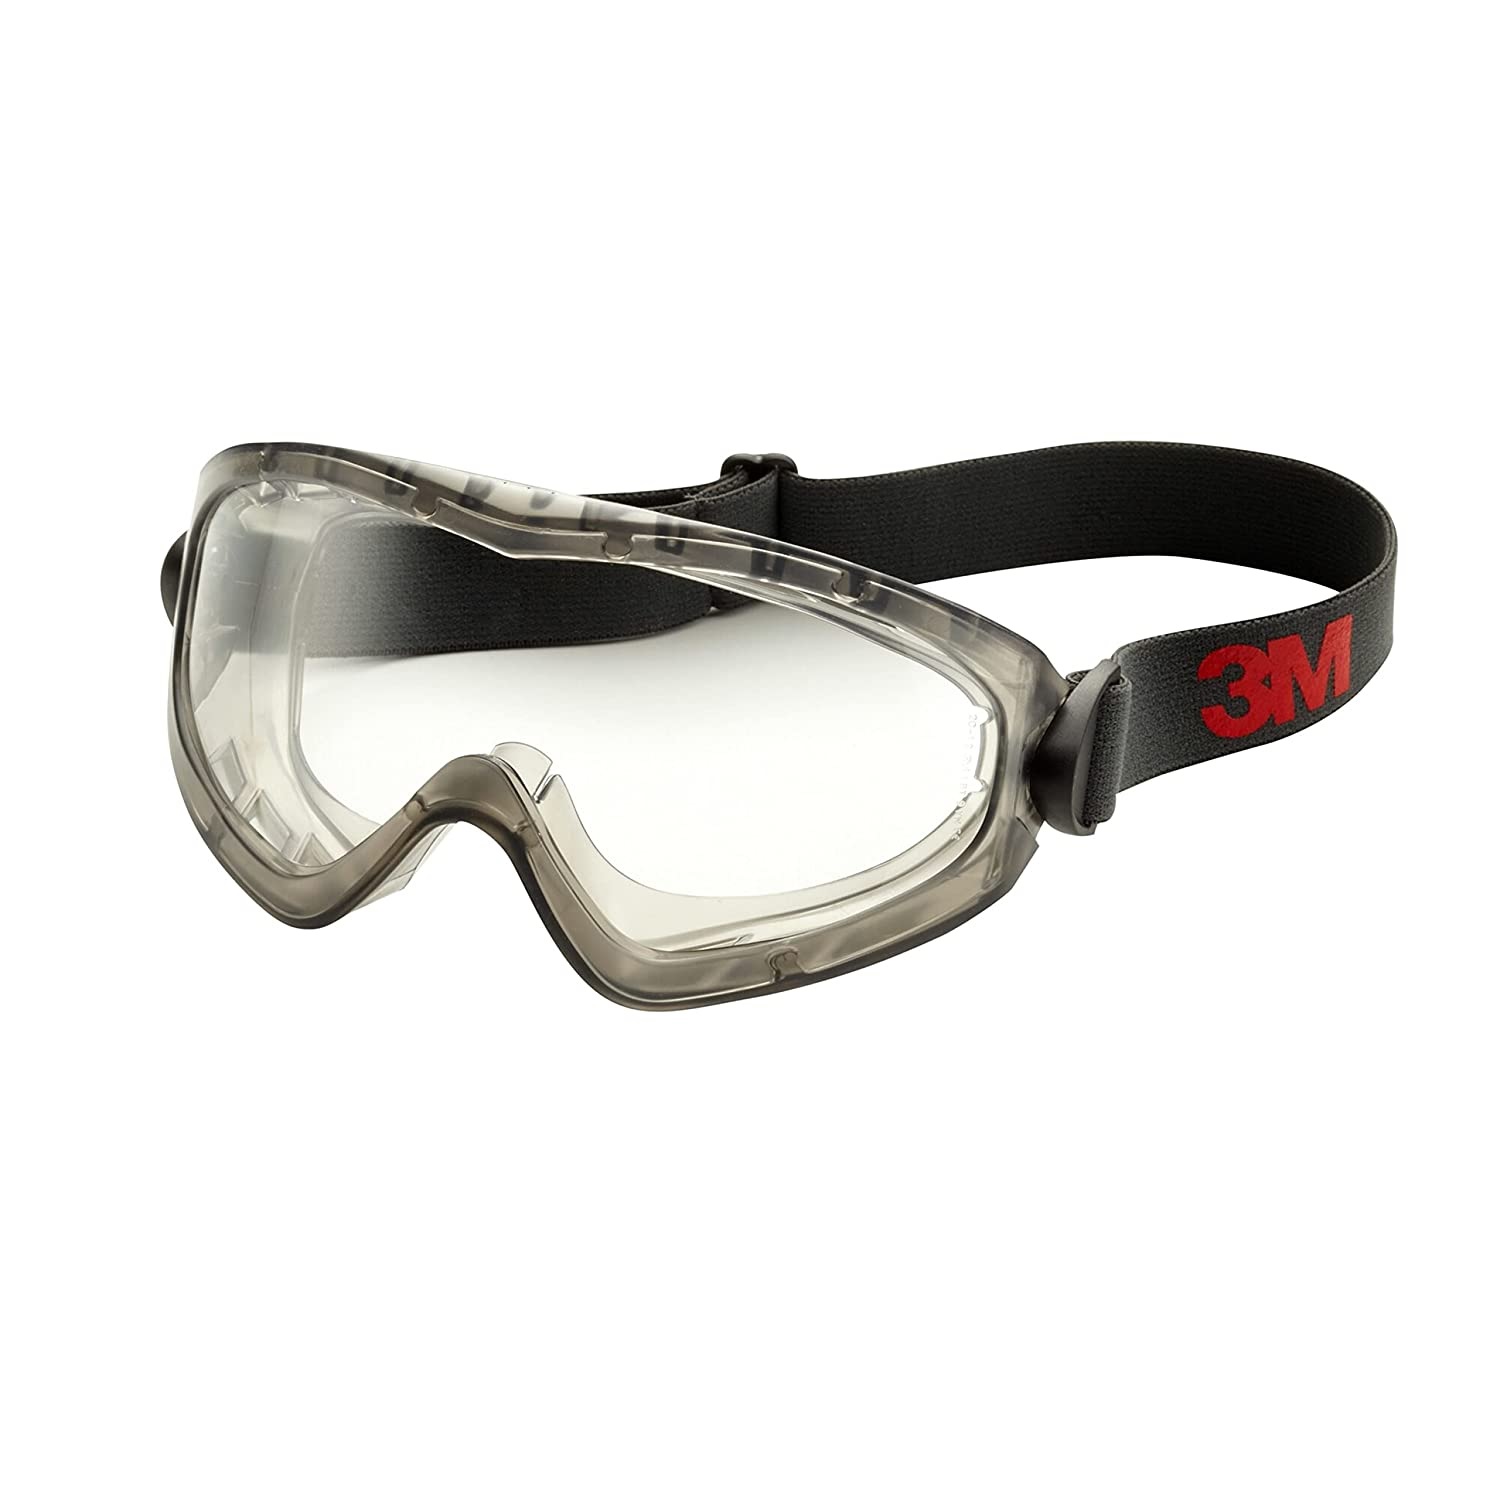 GOGGLE, GEAR INDIRECT VENT CLEAR AF LENS - Goggles